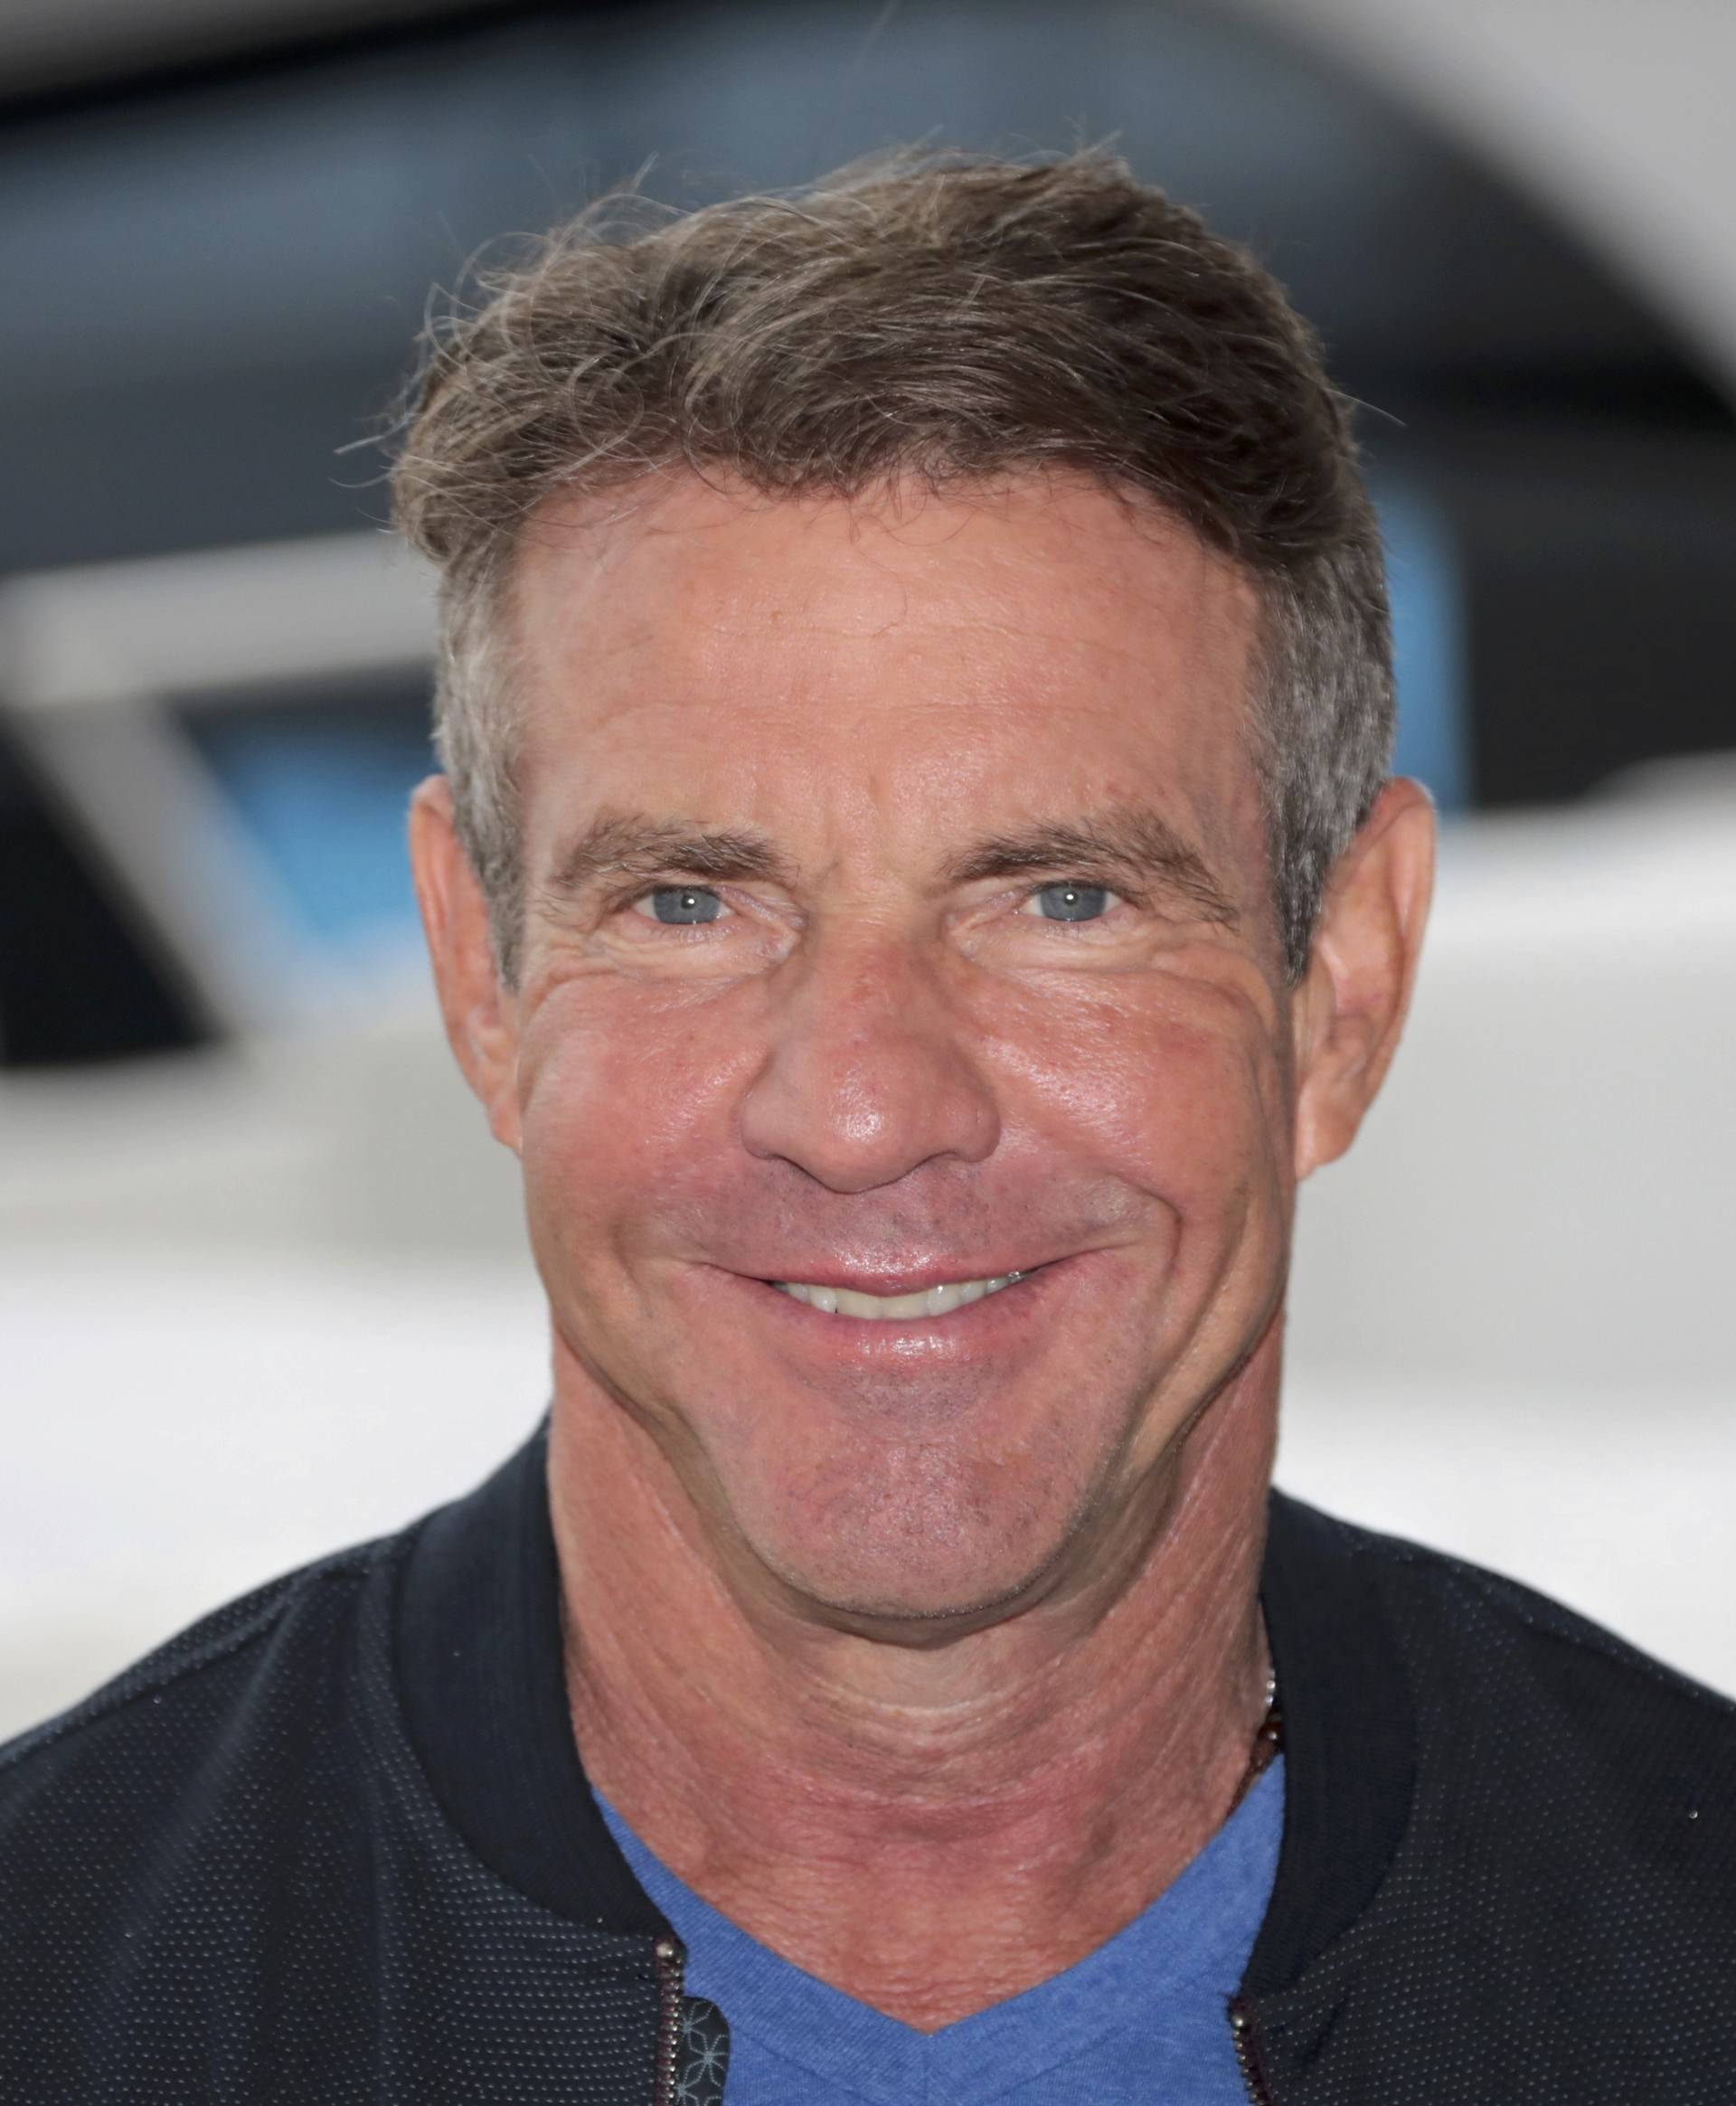 Actor Dennis Quaid poses during a photocall for the television series "Fortitude 2" during the annual MIPCOM television programme market in Cannes